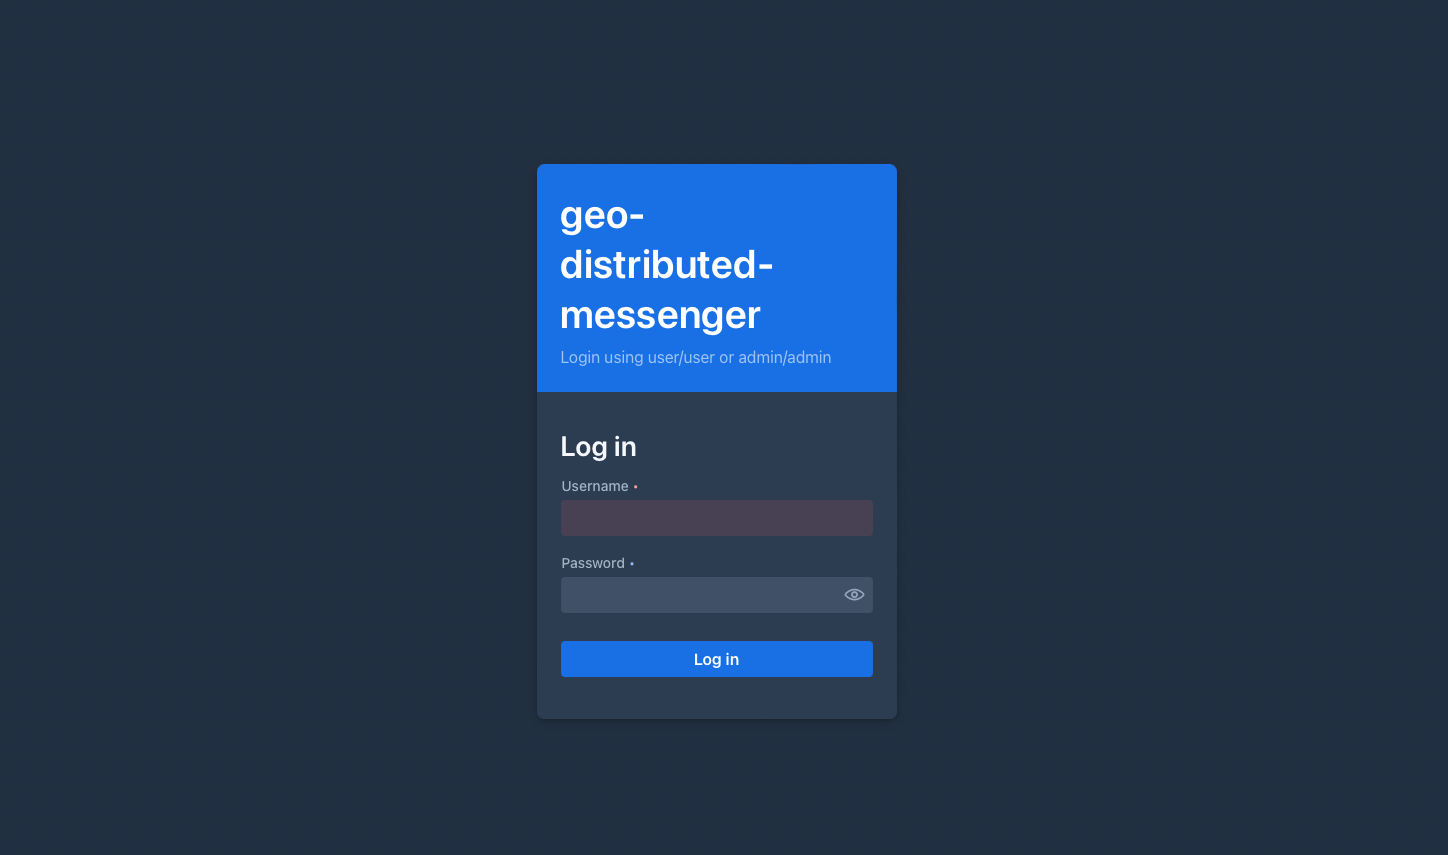 Log-in screen for geo-distributed-messenger